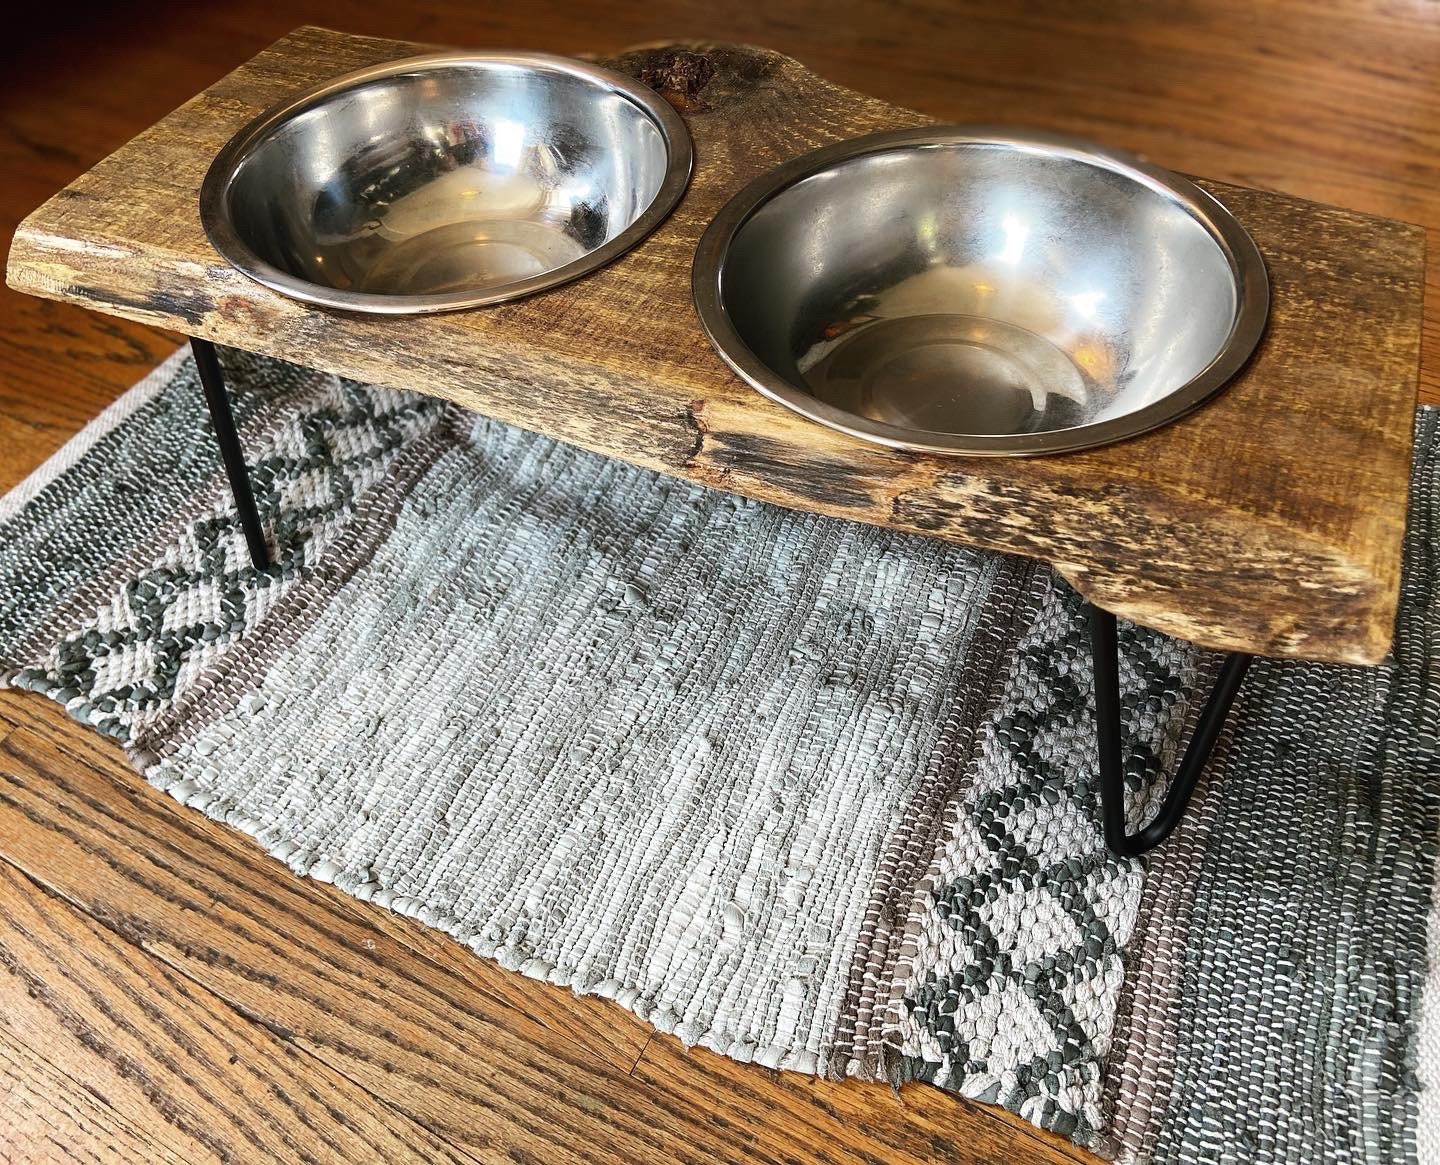 Live Edge Raised Pet Stand for Food or Water Bowls, Dog Food Stand